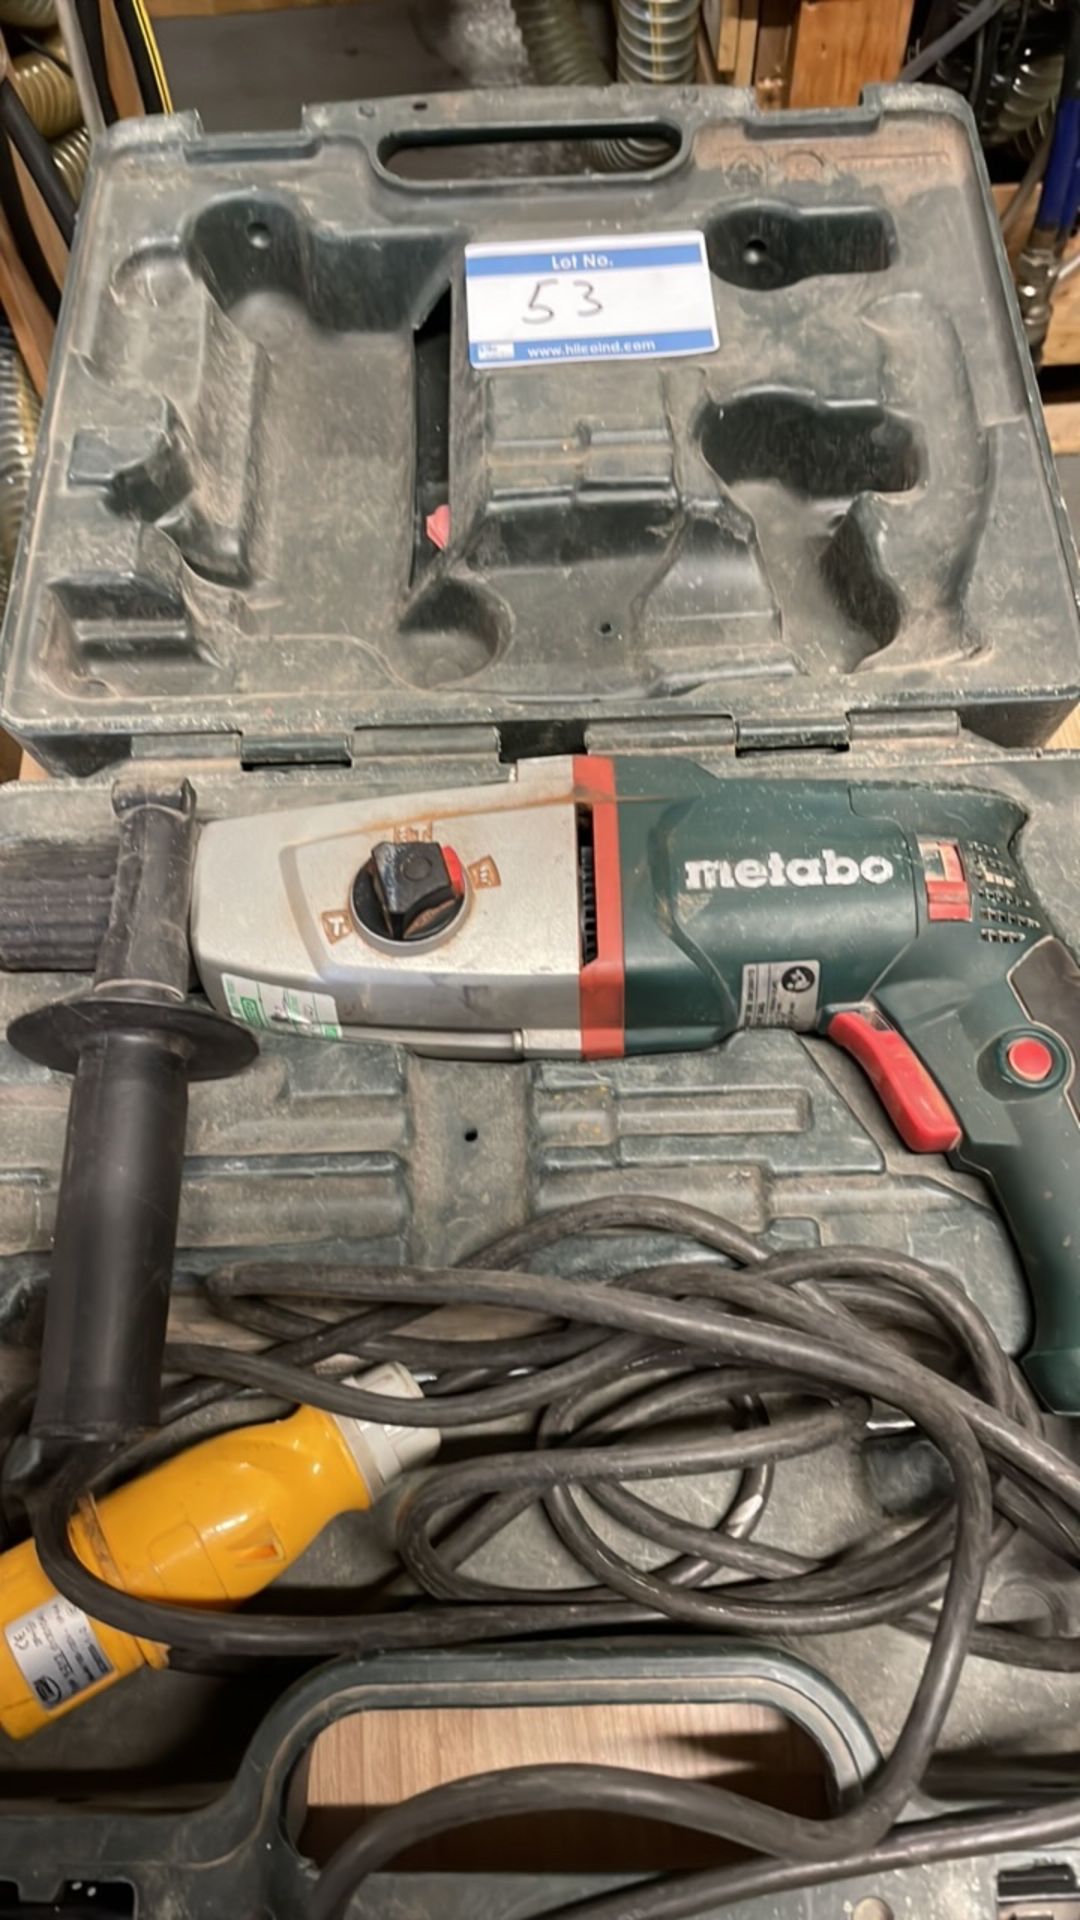 Metabo KHE 2443 1-Inch Slotted Drive Shaft Plus Rotary Hammer Drill - Image 2 of 2